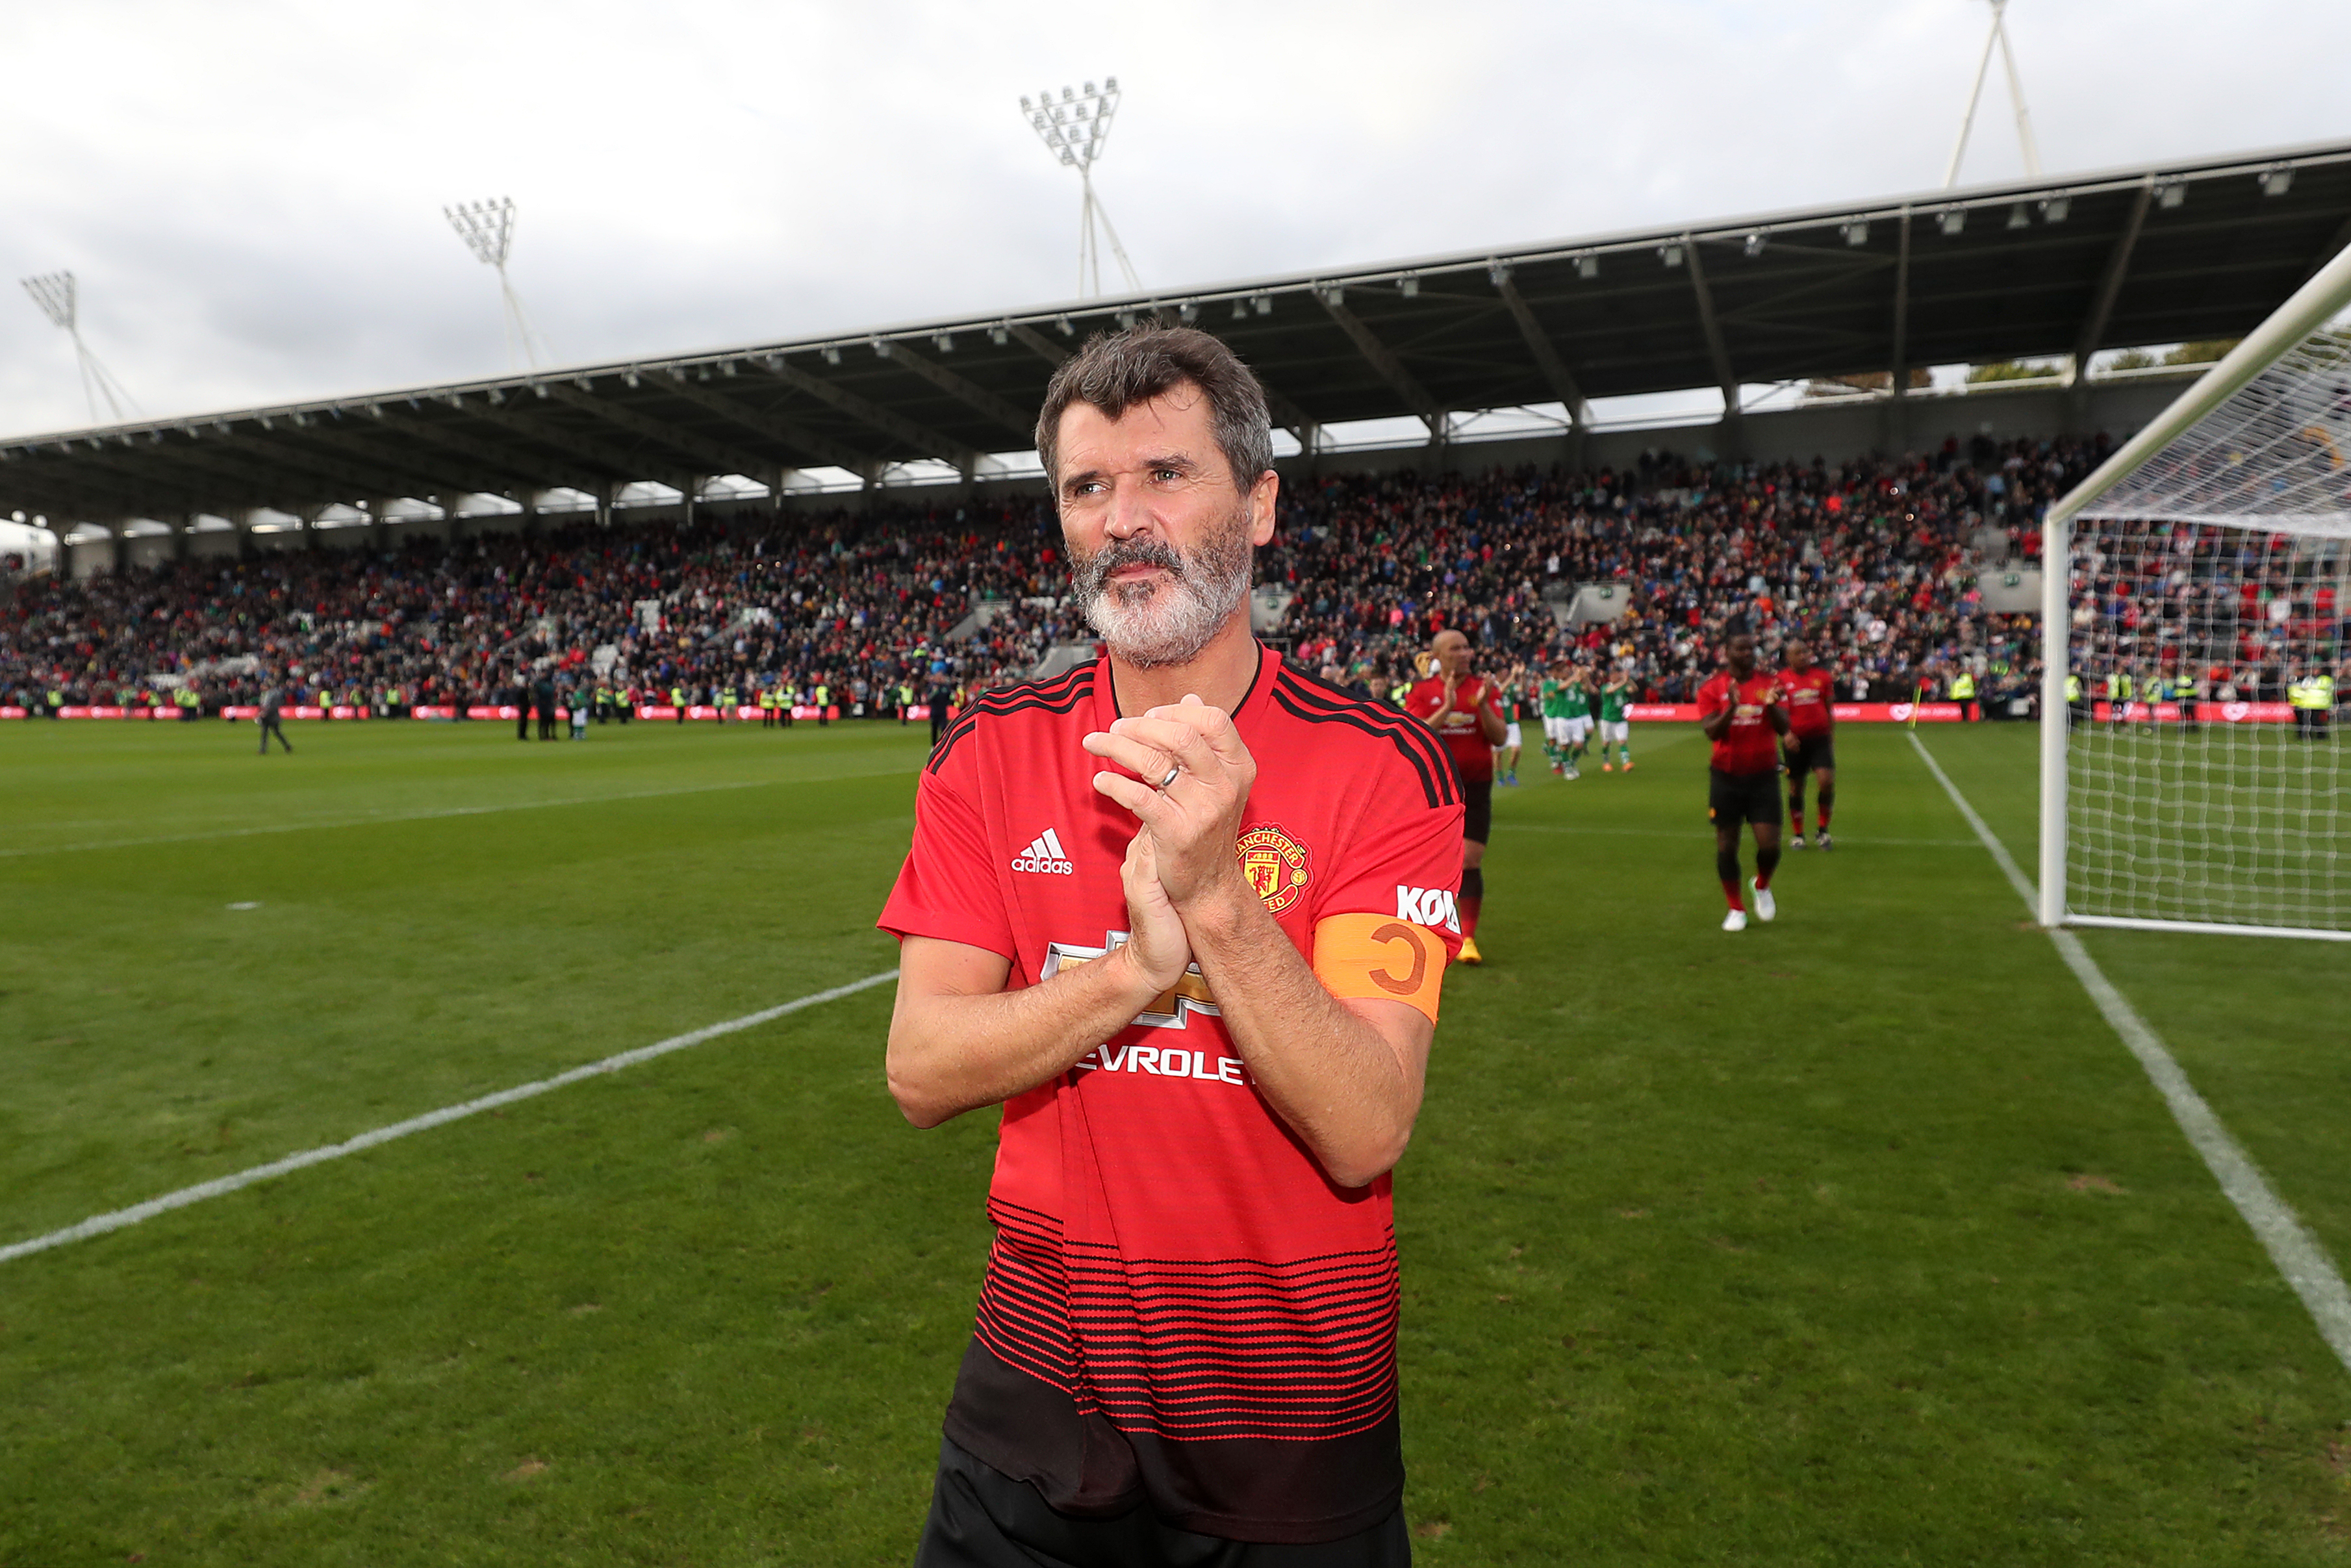 Roy Keane has played for Manchester United in a charity match but has not formally represented the club since his exit